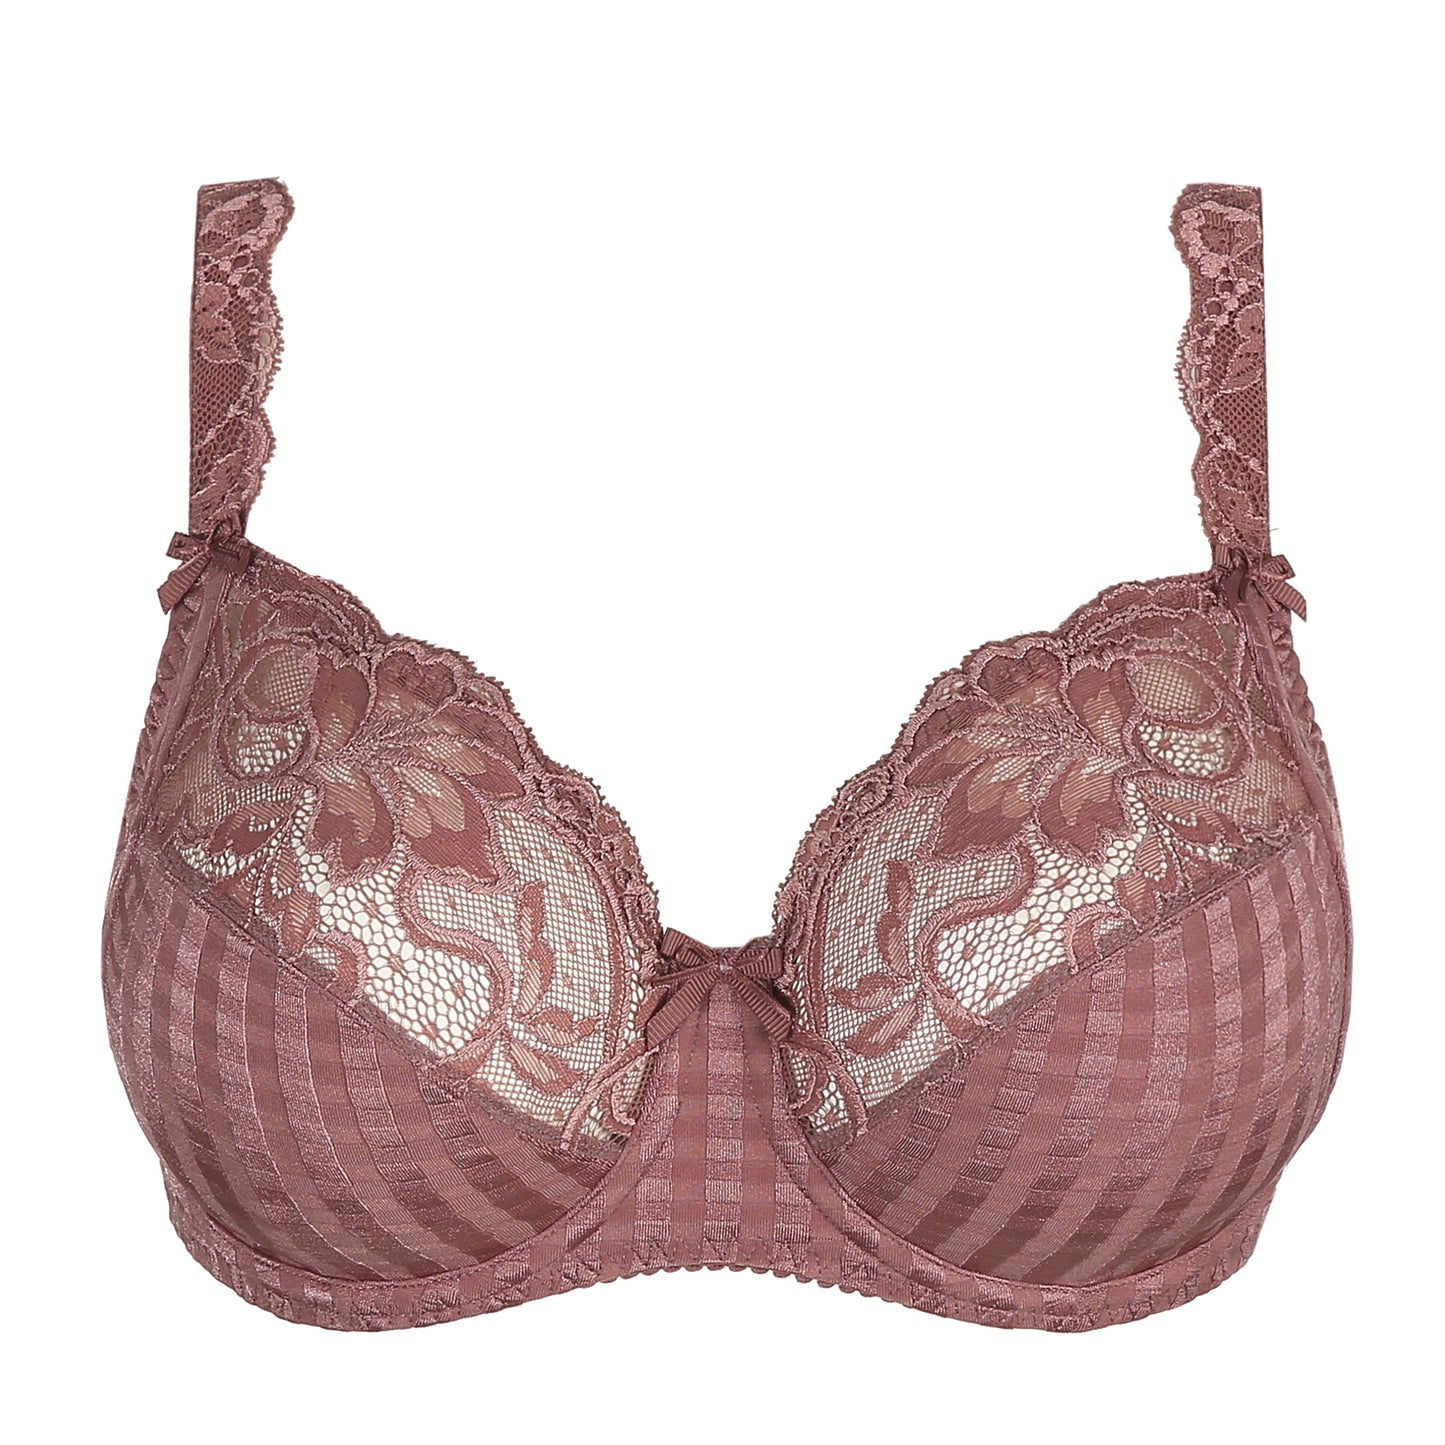 PrimaDonna Madison volle cup bh satin taupe